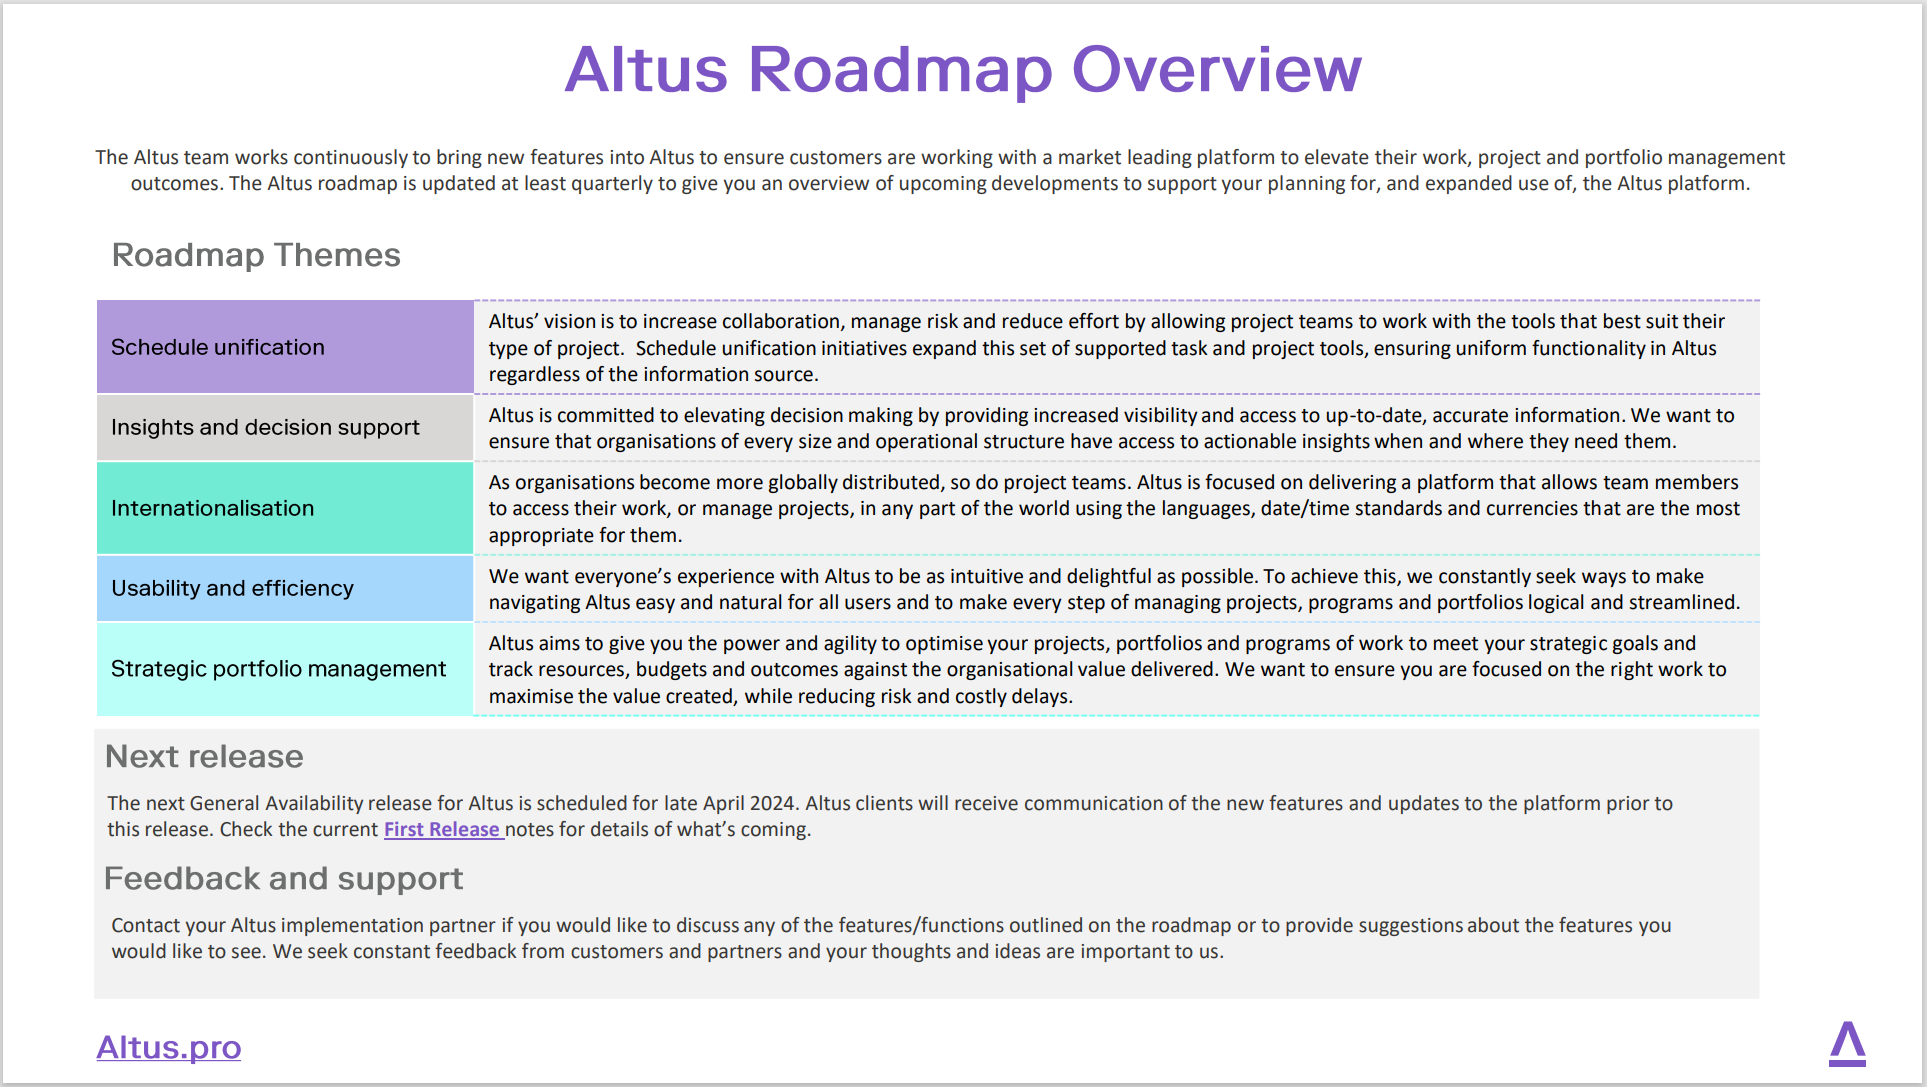 This image displays the first page of the Altus Roadmap which gives an overview of the themes included in the roadmap